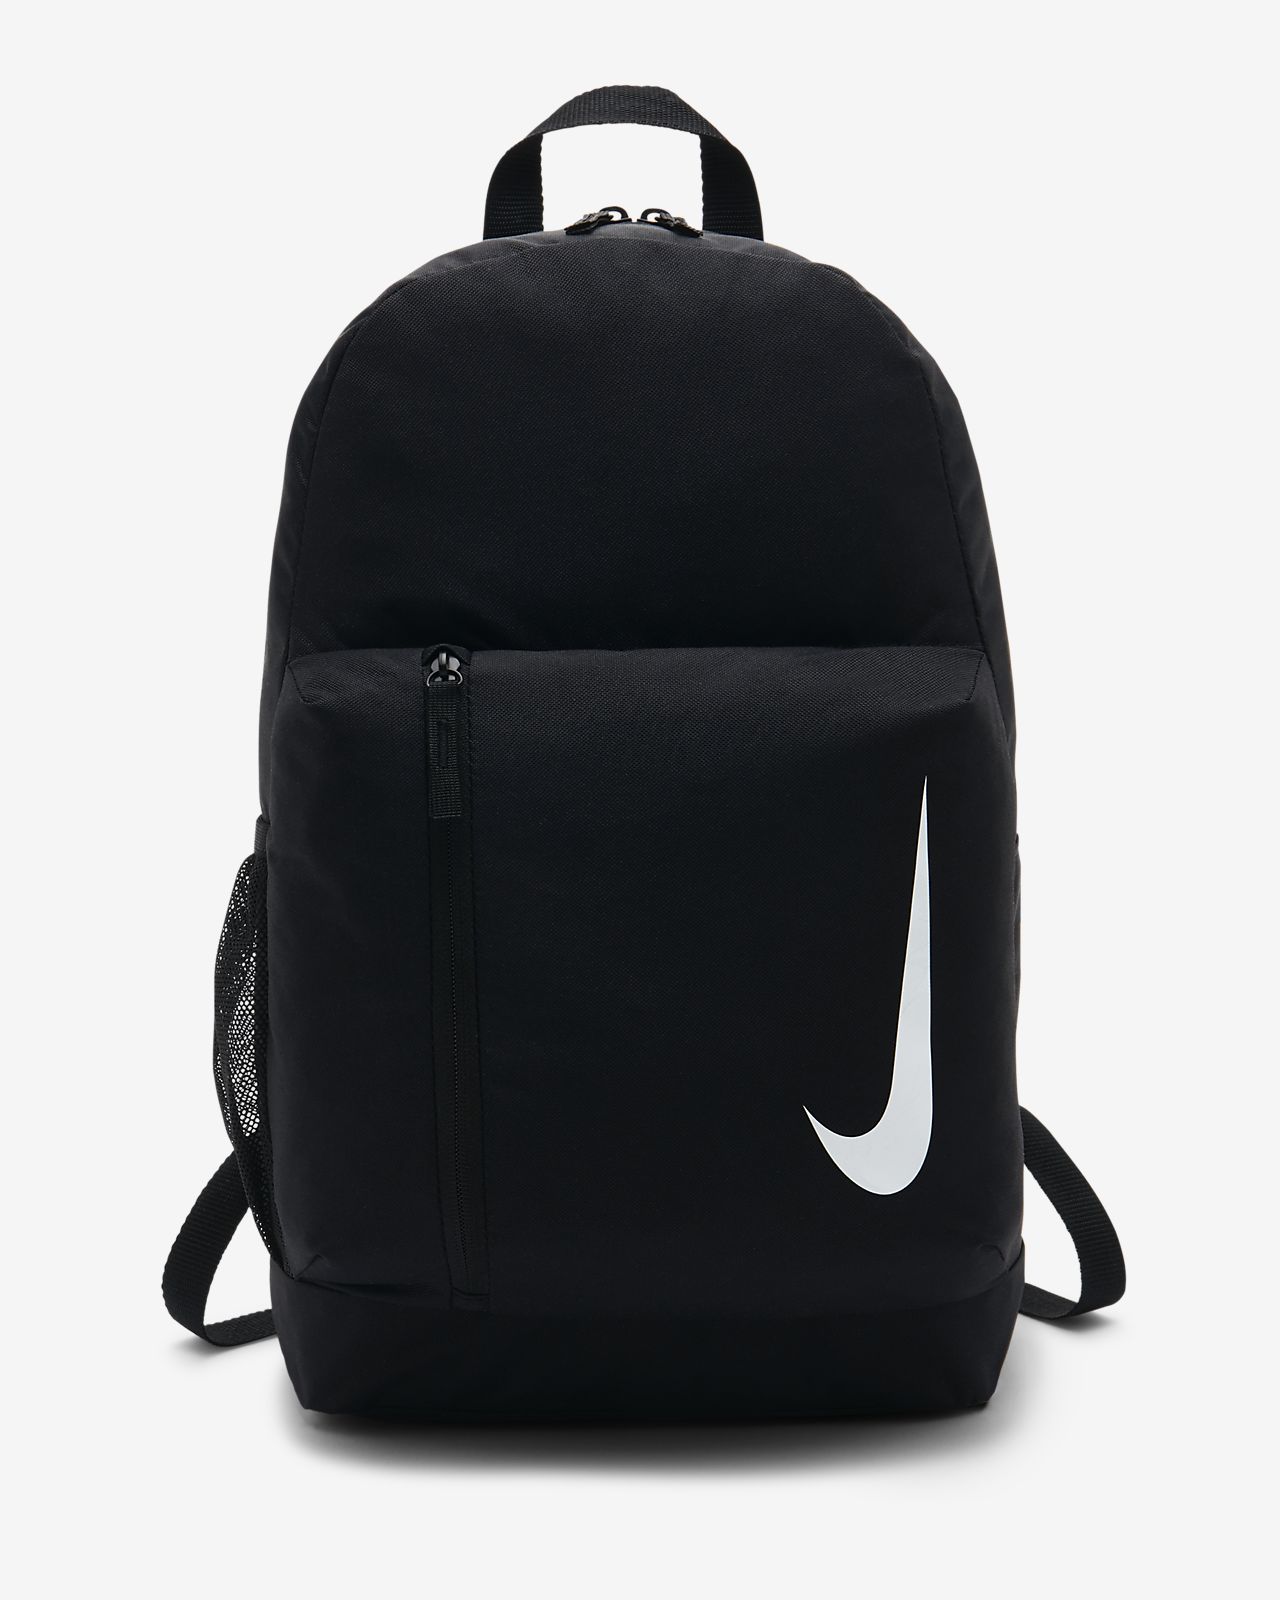 sac a dos nike homme rouge